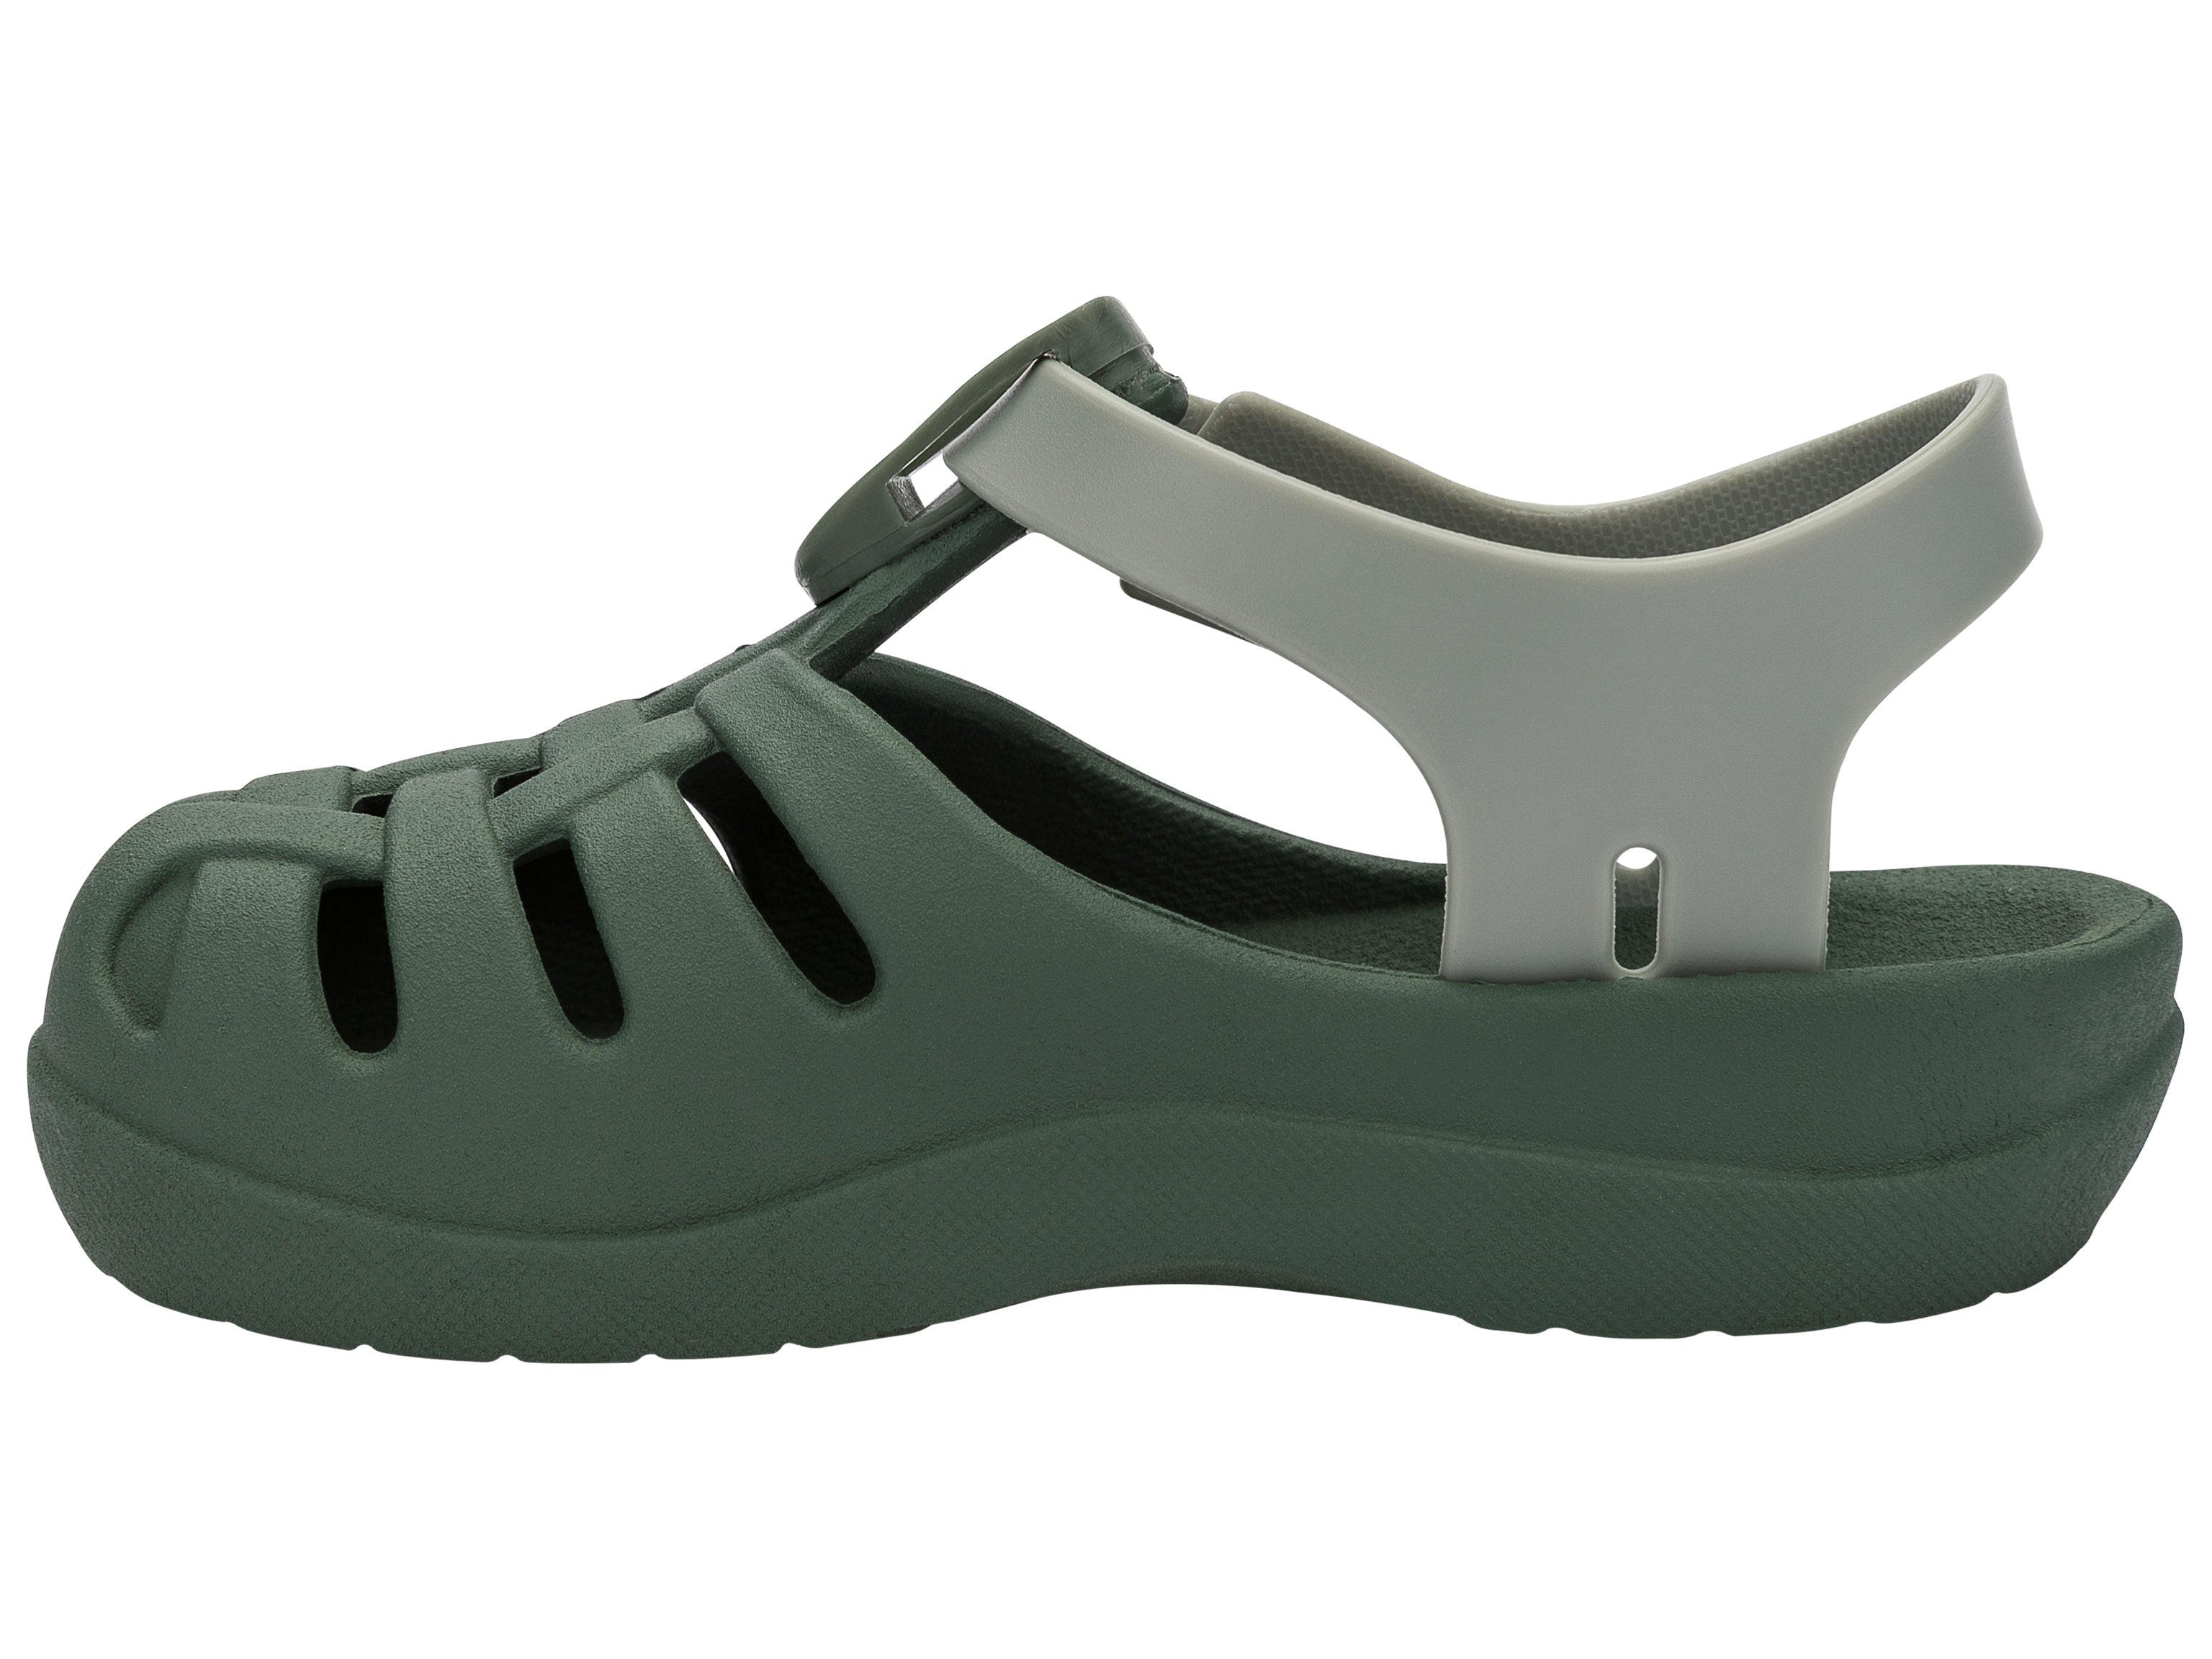 Inner side view of a green Ipanema Summer Basic baby sandal.